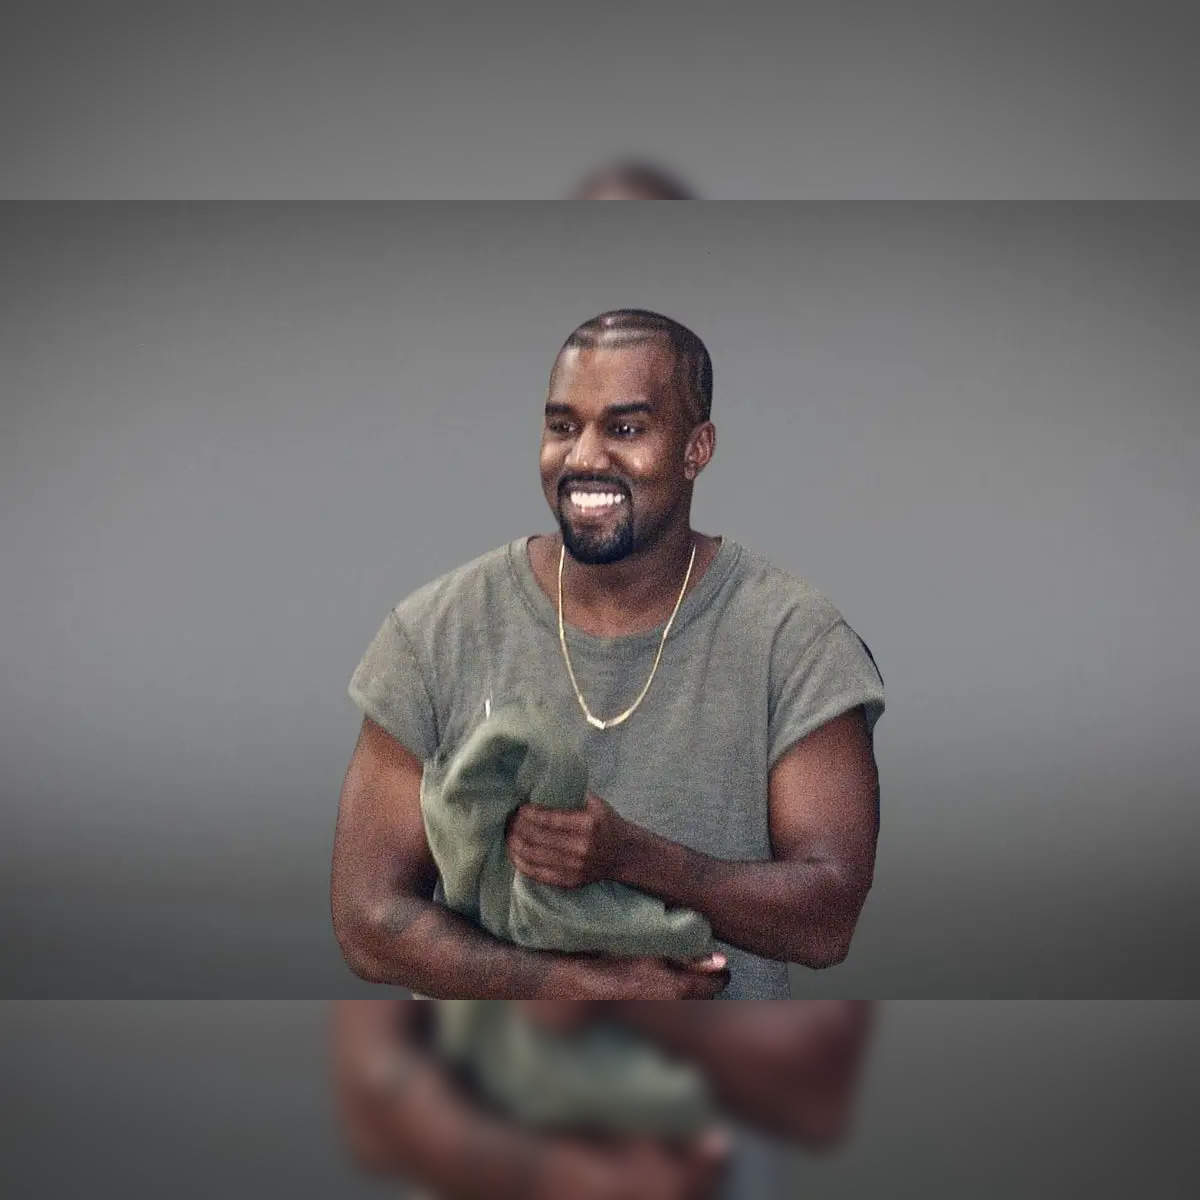 kanye west: Here's what Kanye West said about his bankruptcy situation  amidst Vultures release - The Economic Times